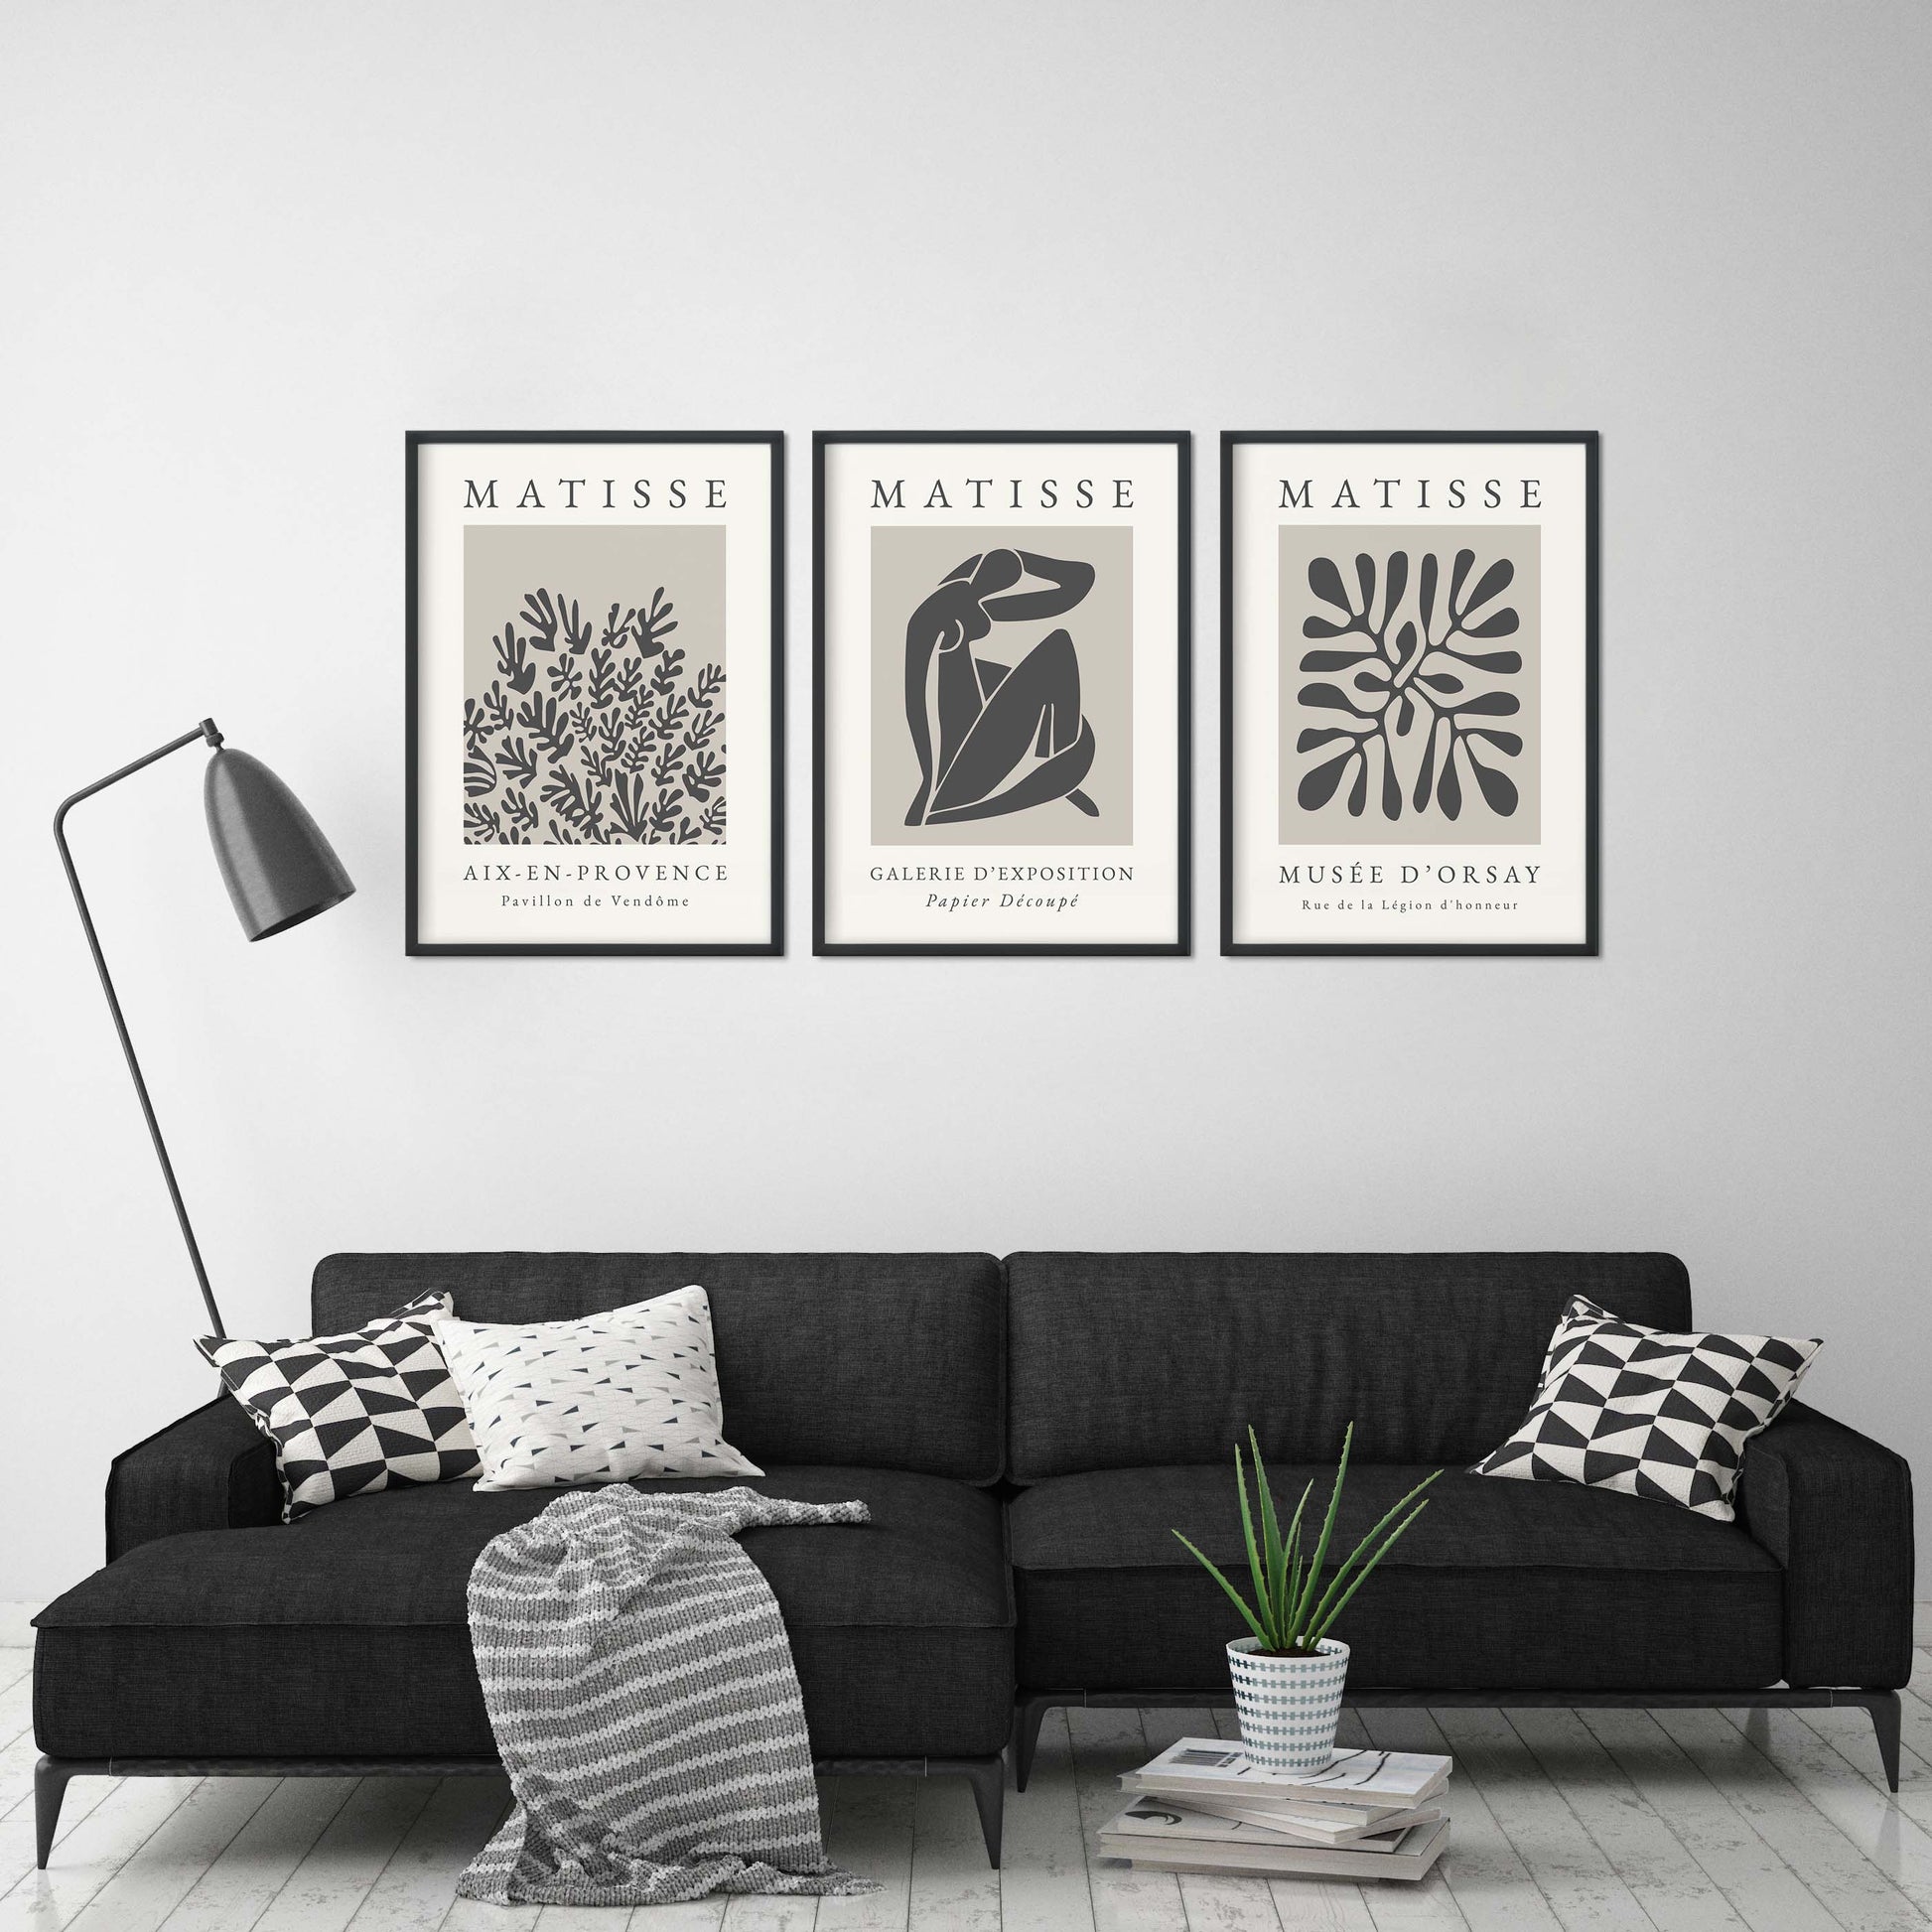 Set of 3 Matisse posters in beige and black